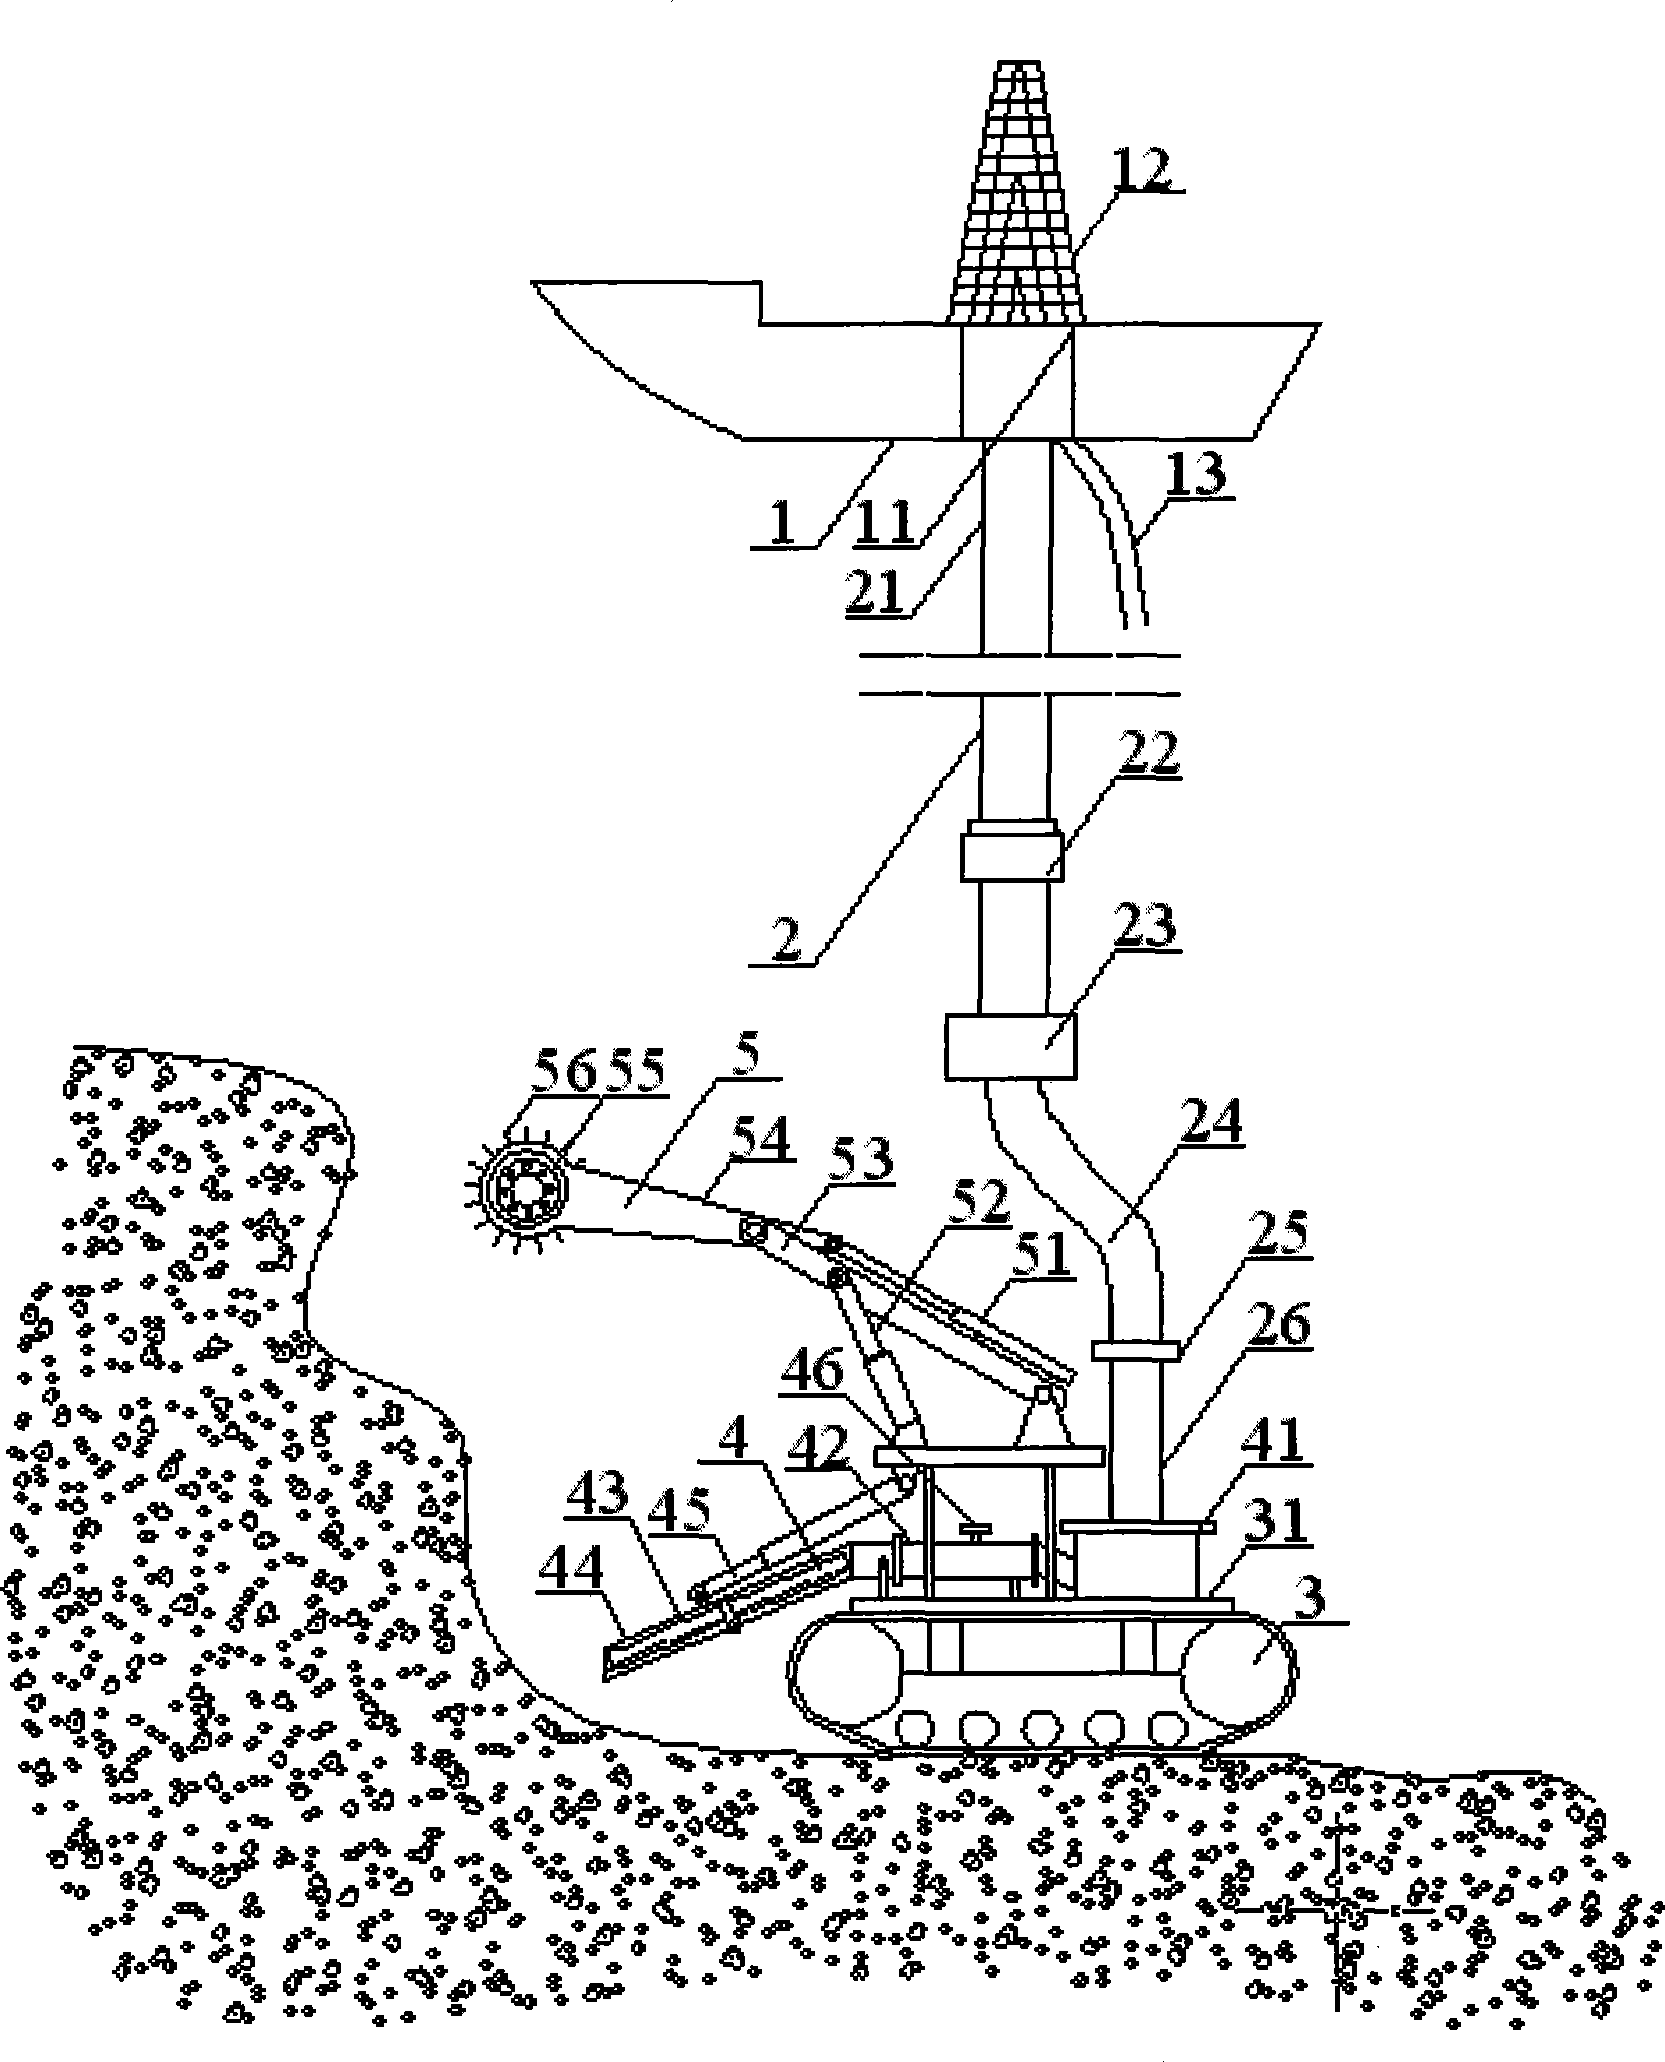 Method and device for extracting volcanogenic massive sulfide ore deposit on seabed